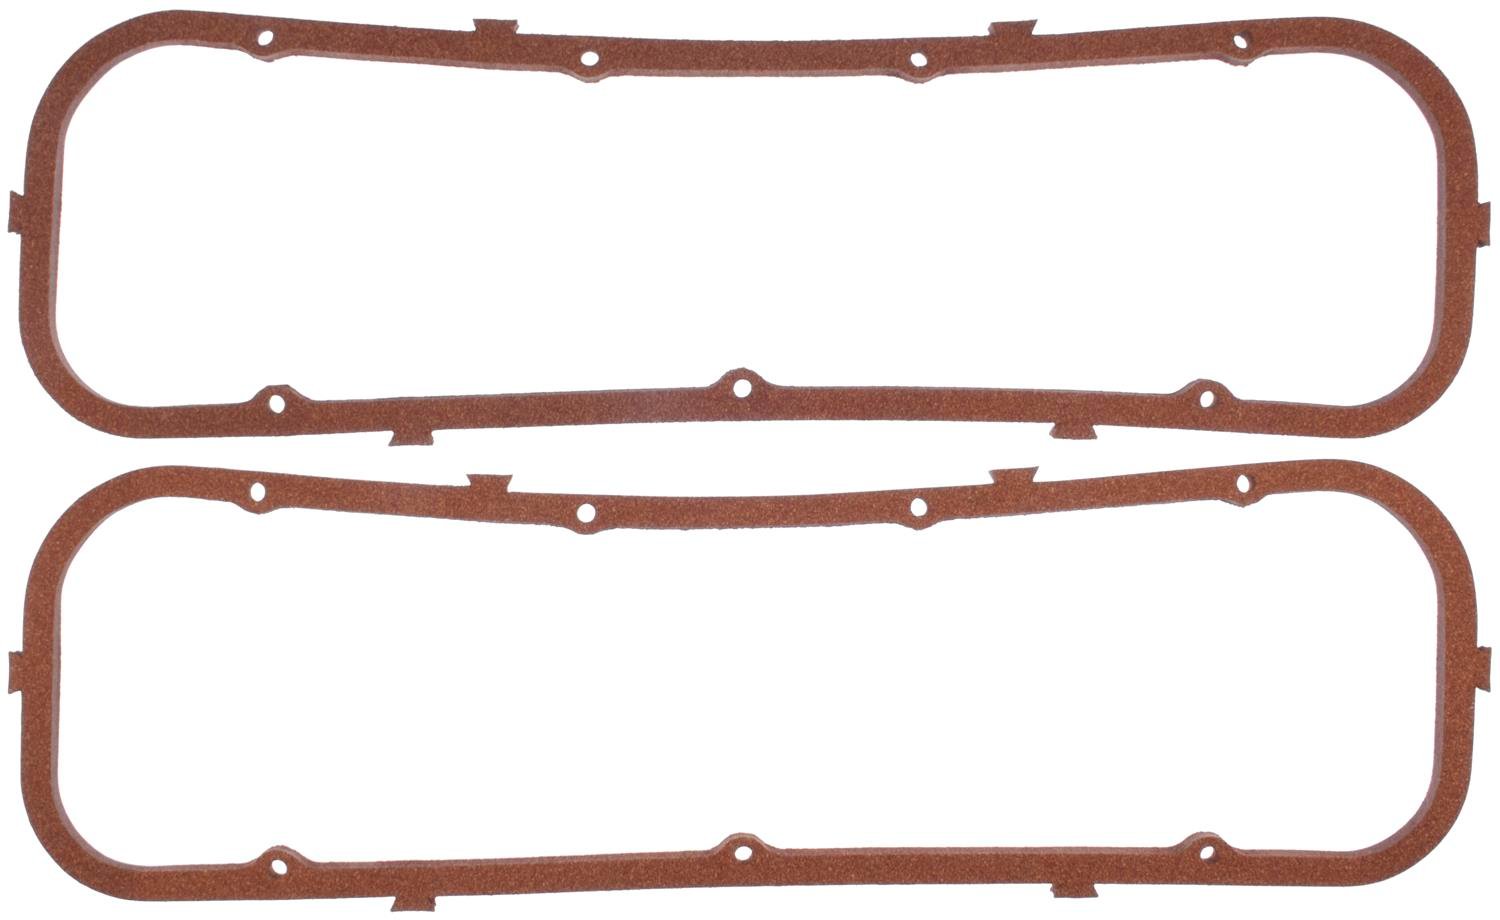 Valve Cover Gasket Set for Big Block Chevy